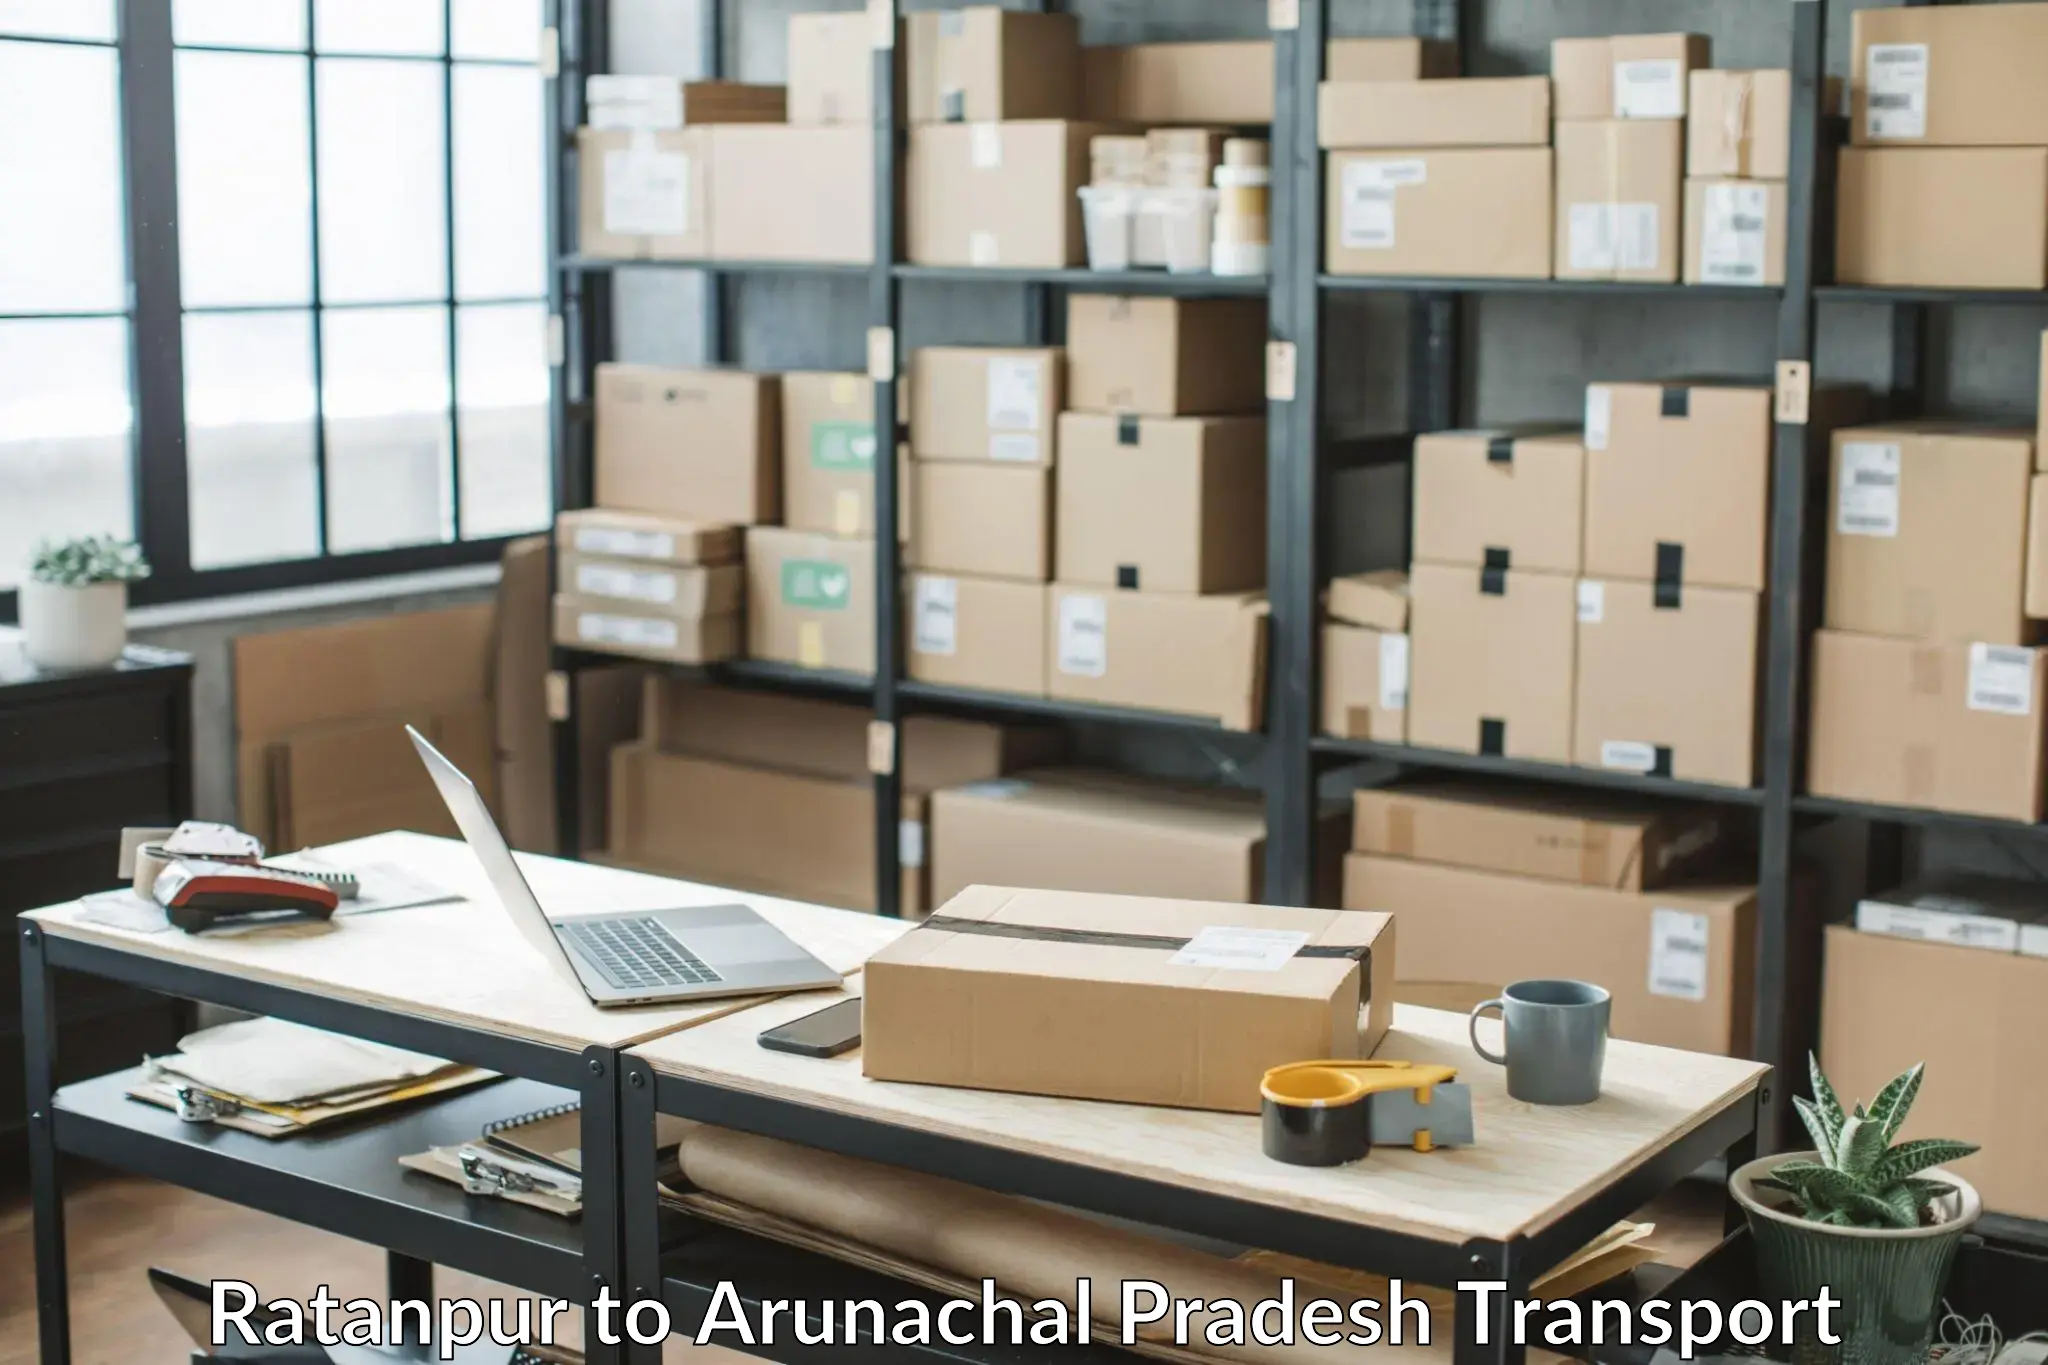 Part load transport service in India in Ratanpur to Deomali